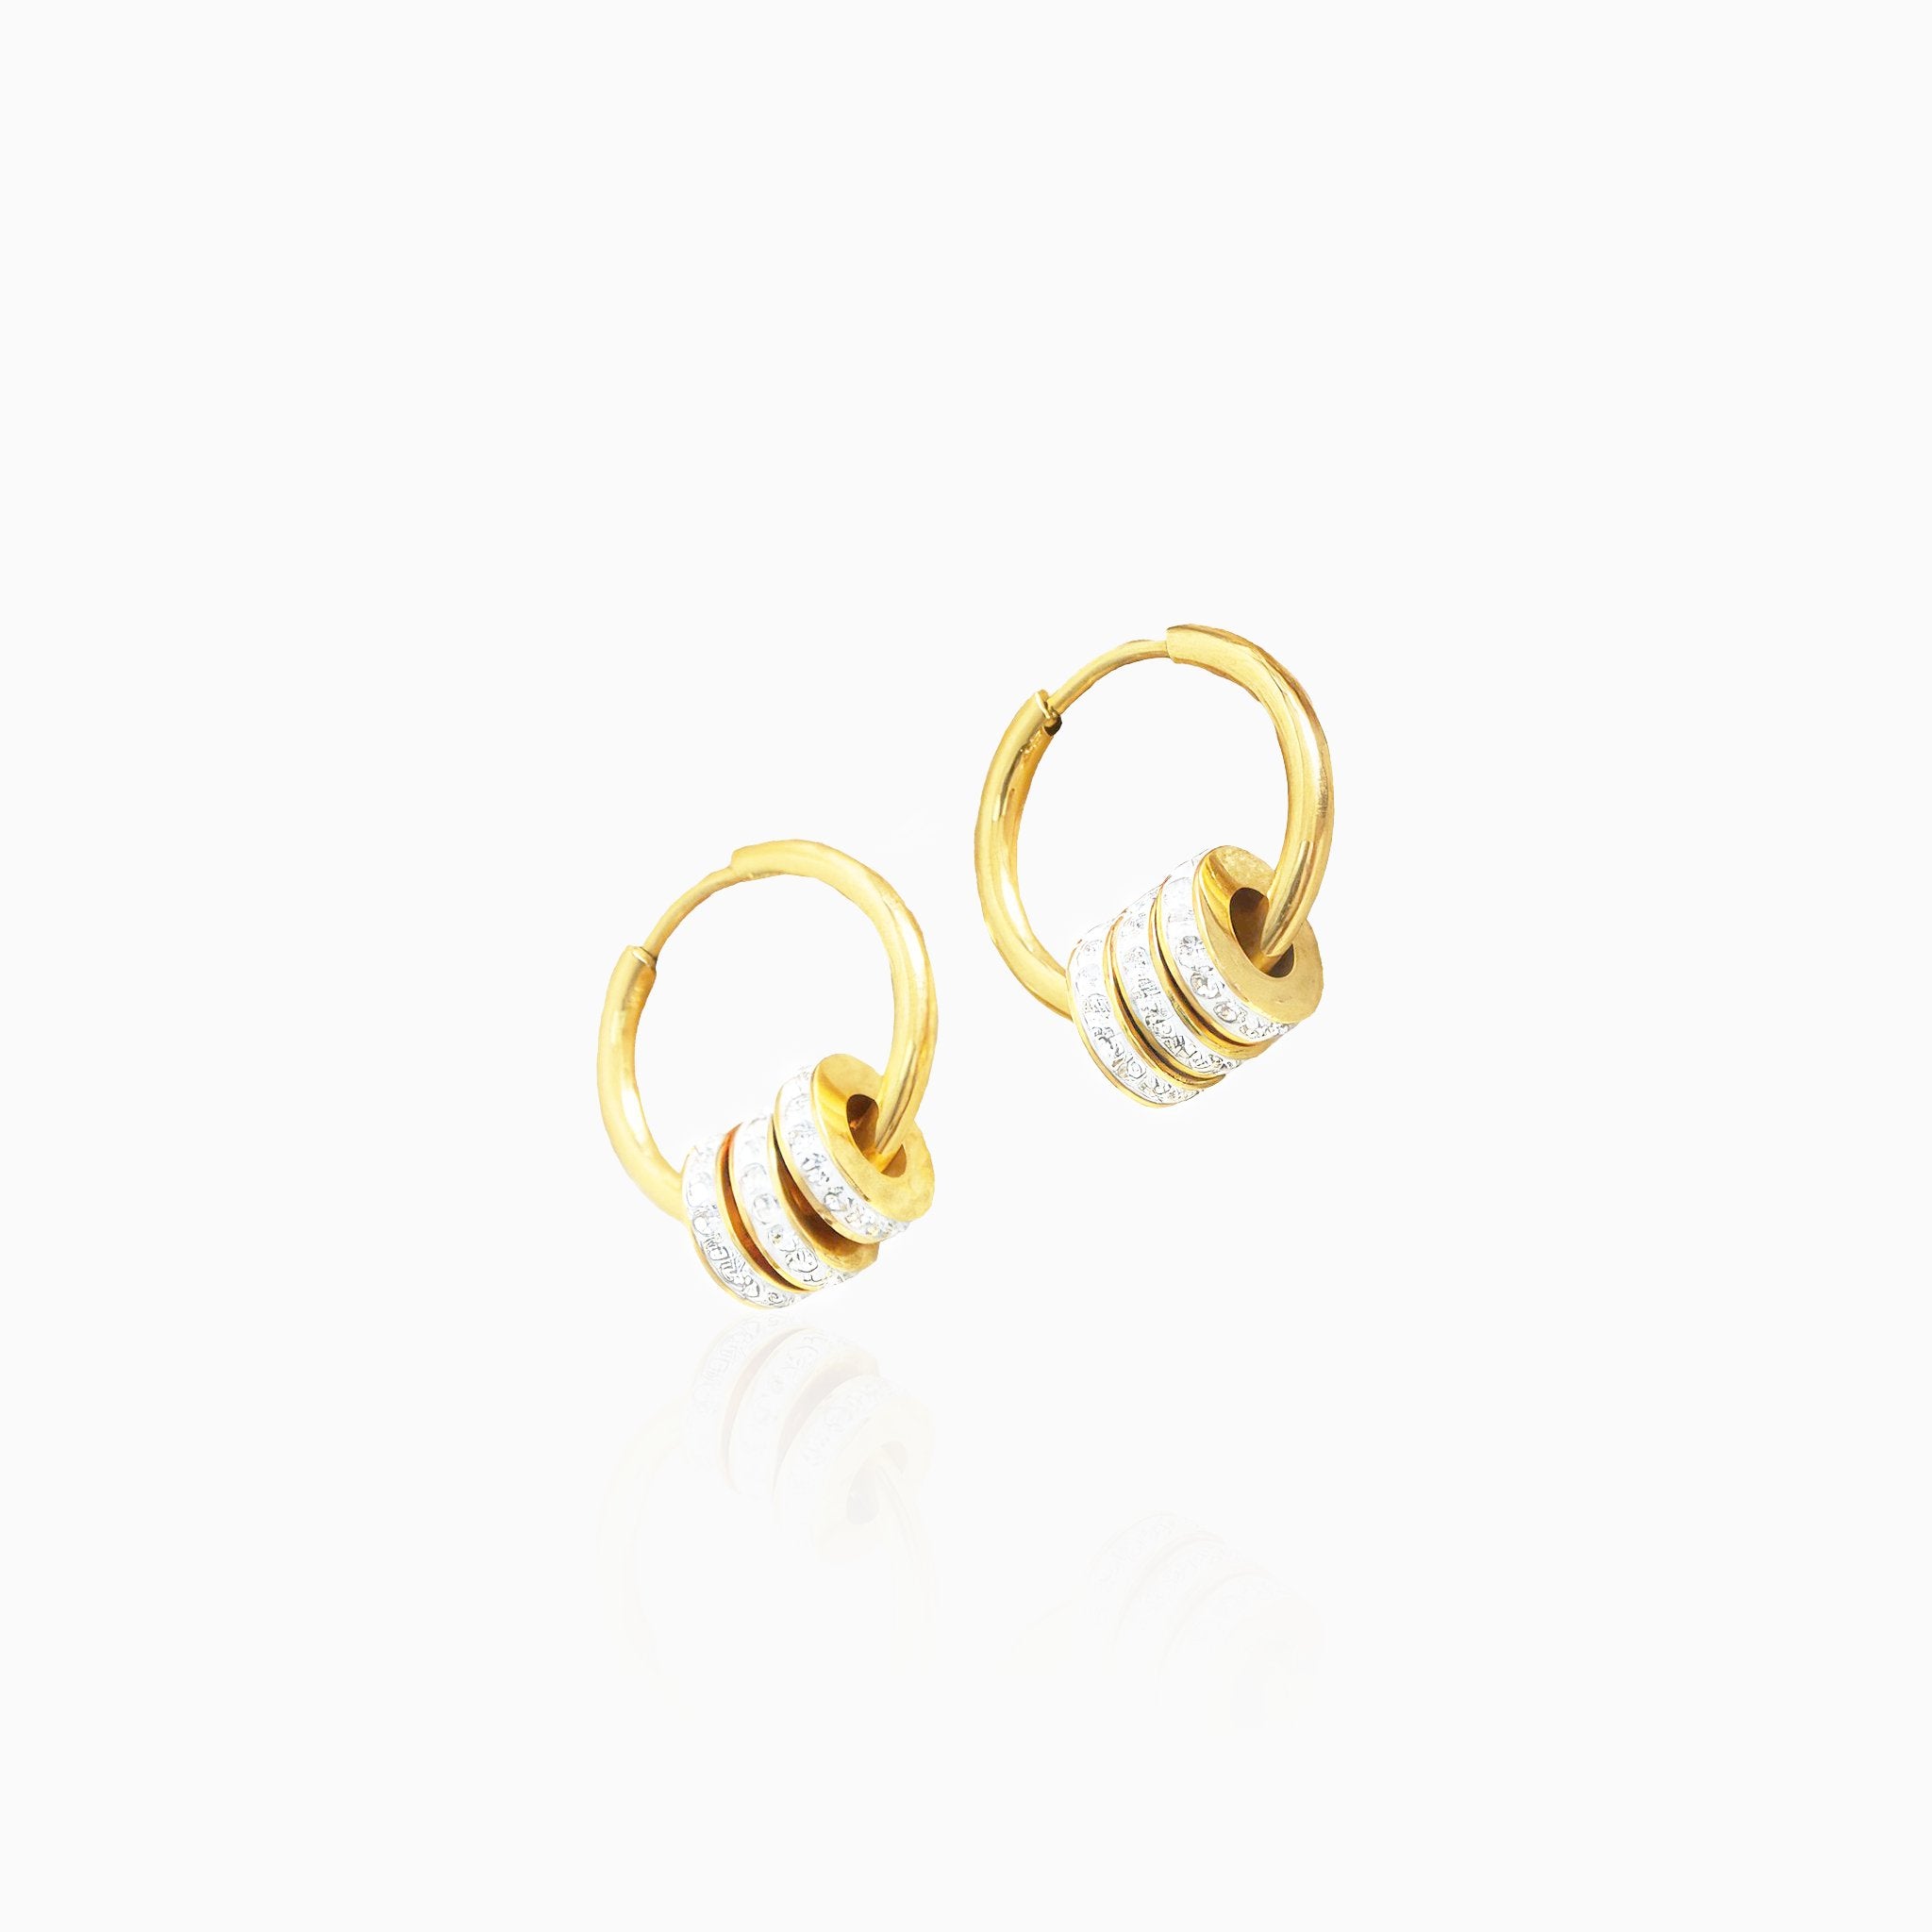 Dazzling Ring Earrings with Studded Circles - Nobbier - Earrings - 18K Gold And Titanium PVD Coated Jewelry